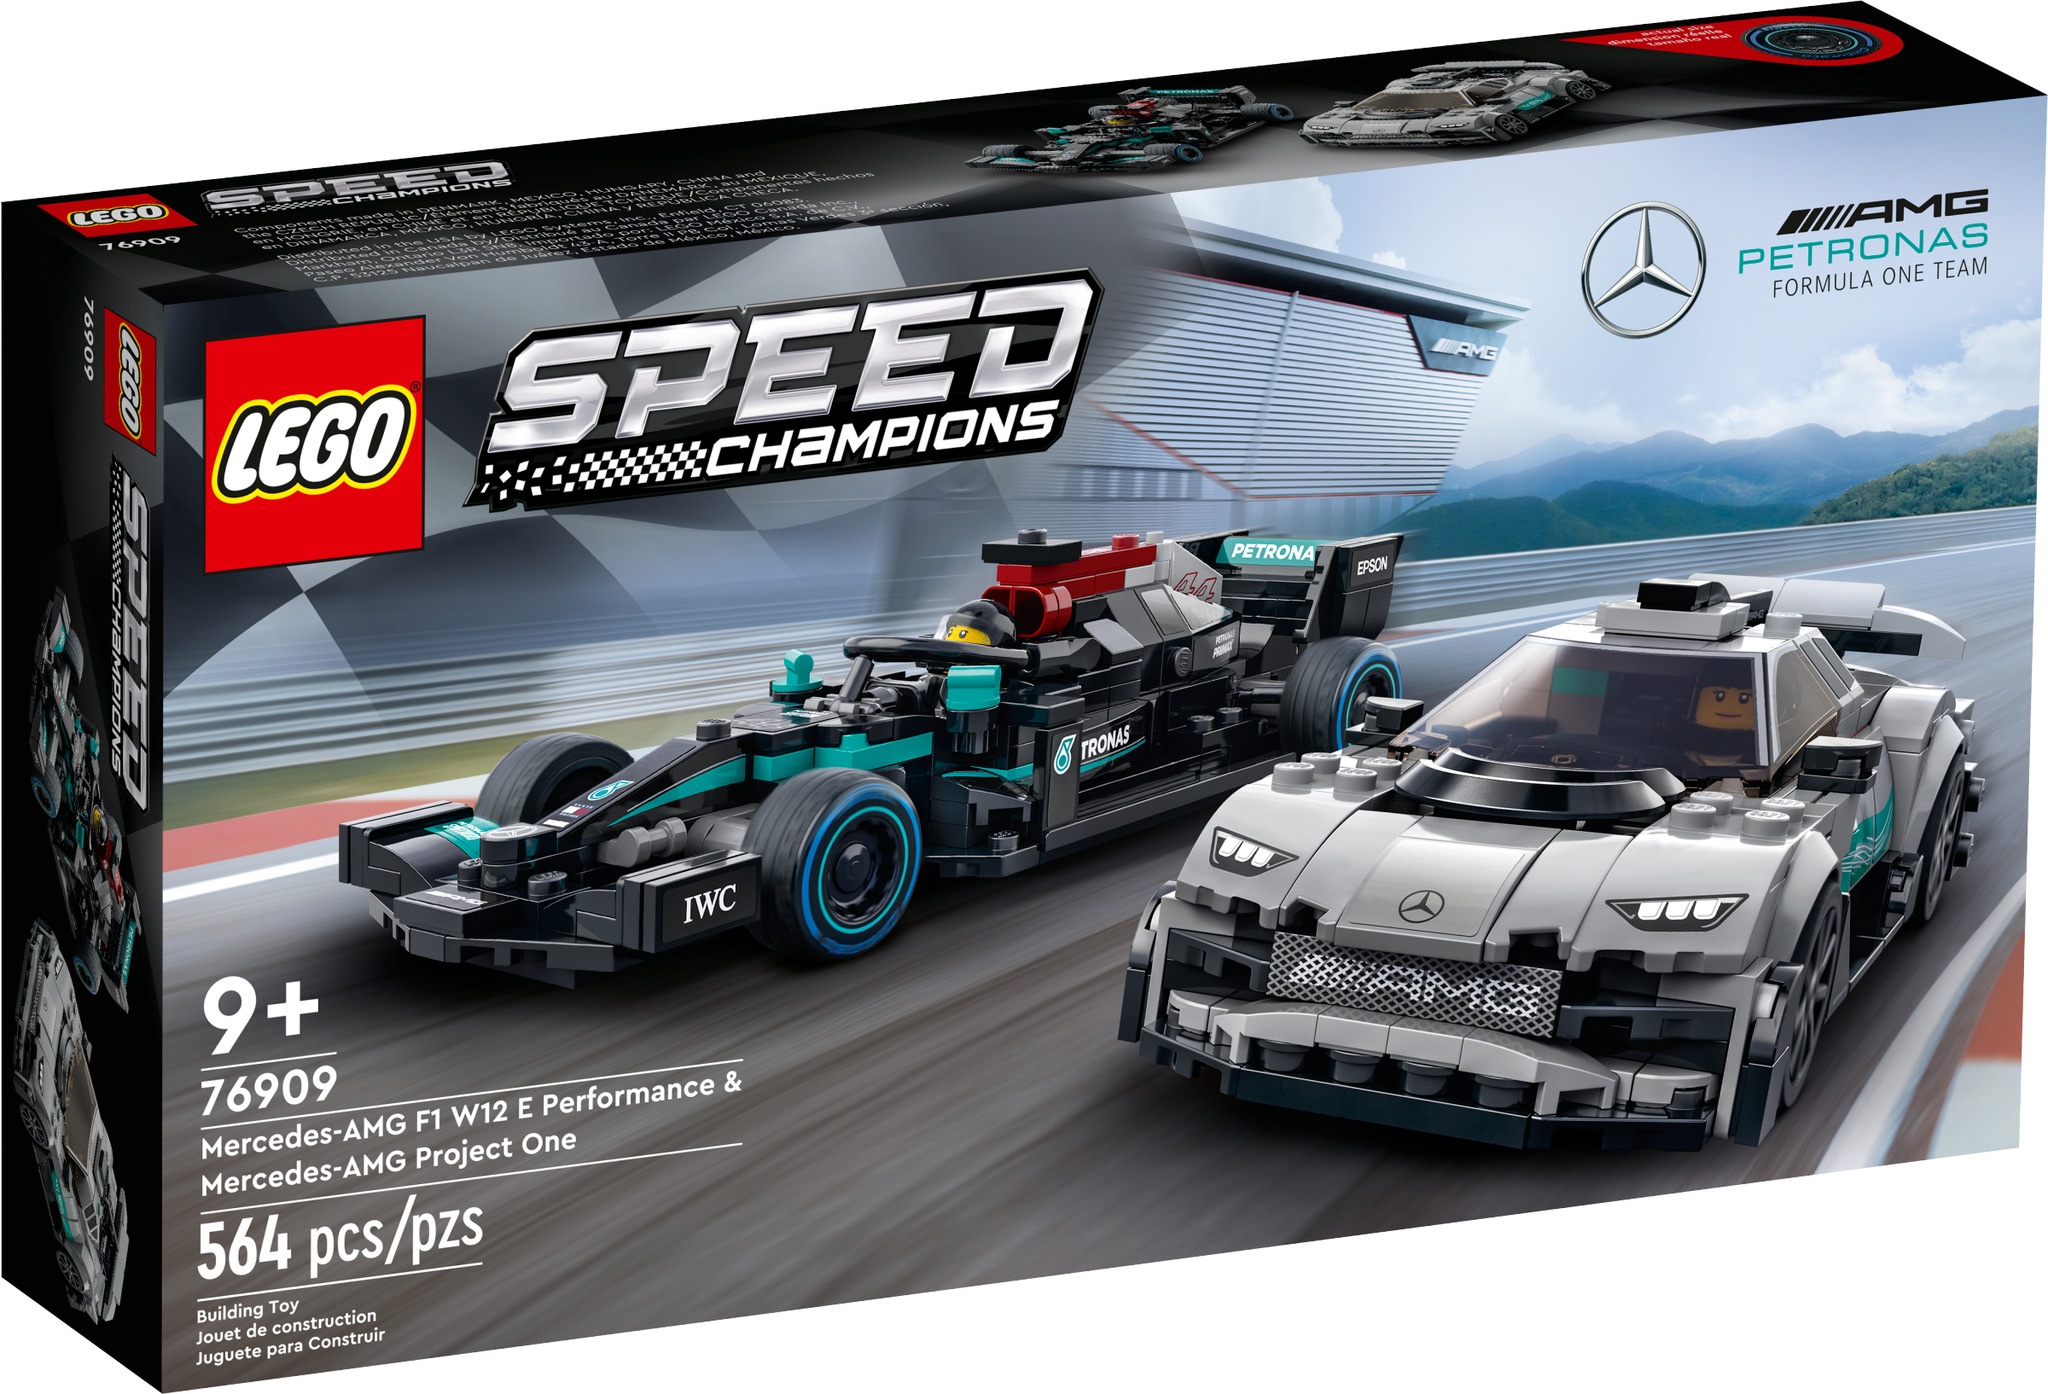 LEGO Speed Champions 76909 - Mercedes Amg F1 W12 E Performance E Mercedes  Amg Project One